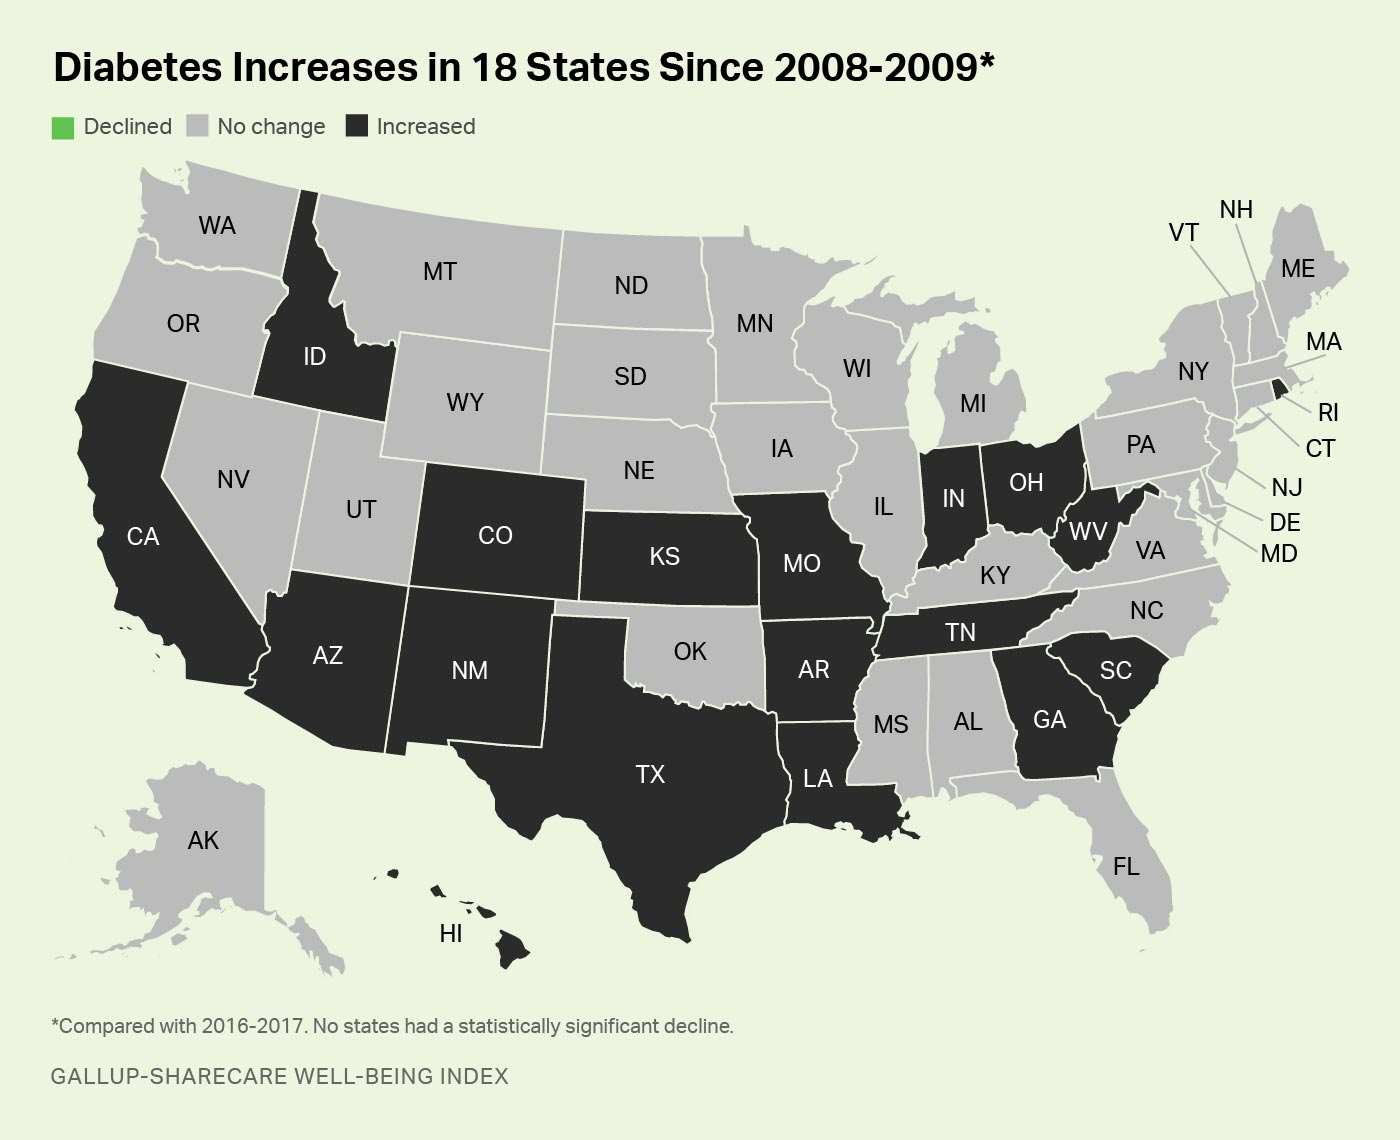   card. Diabetes rates have increased in 18 states since 2008-2009 and have not decreased in any US state 